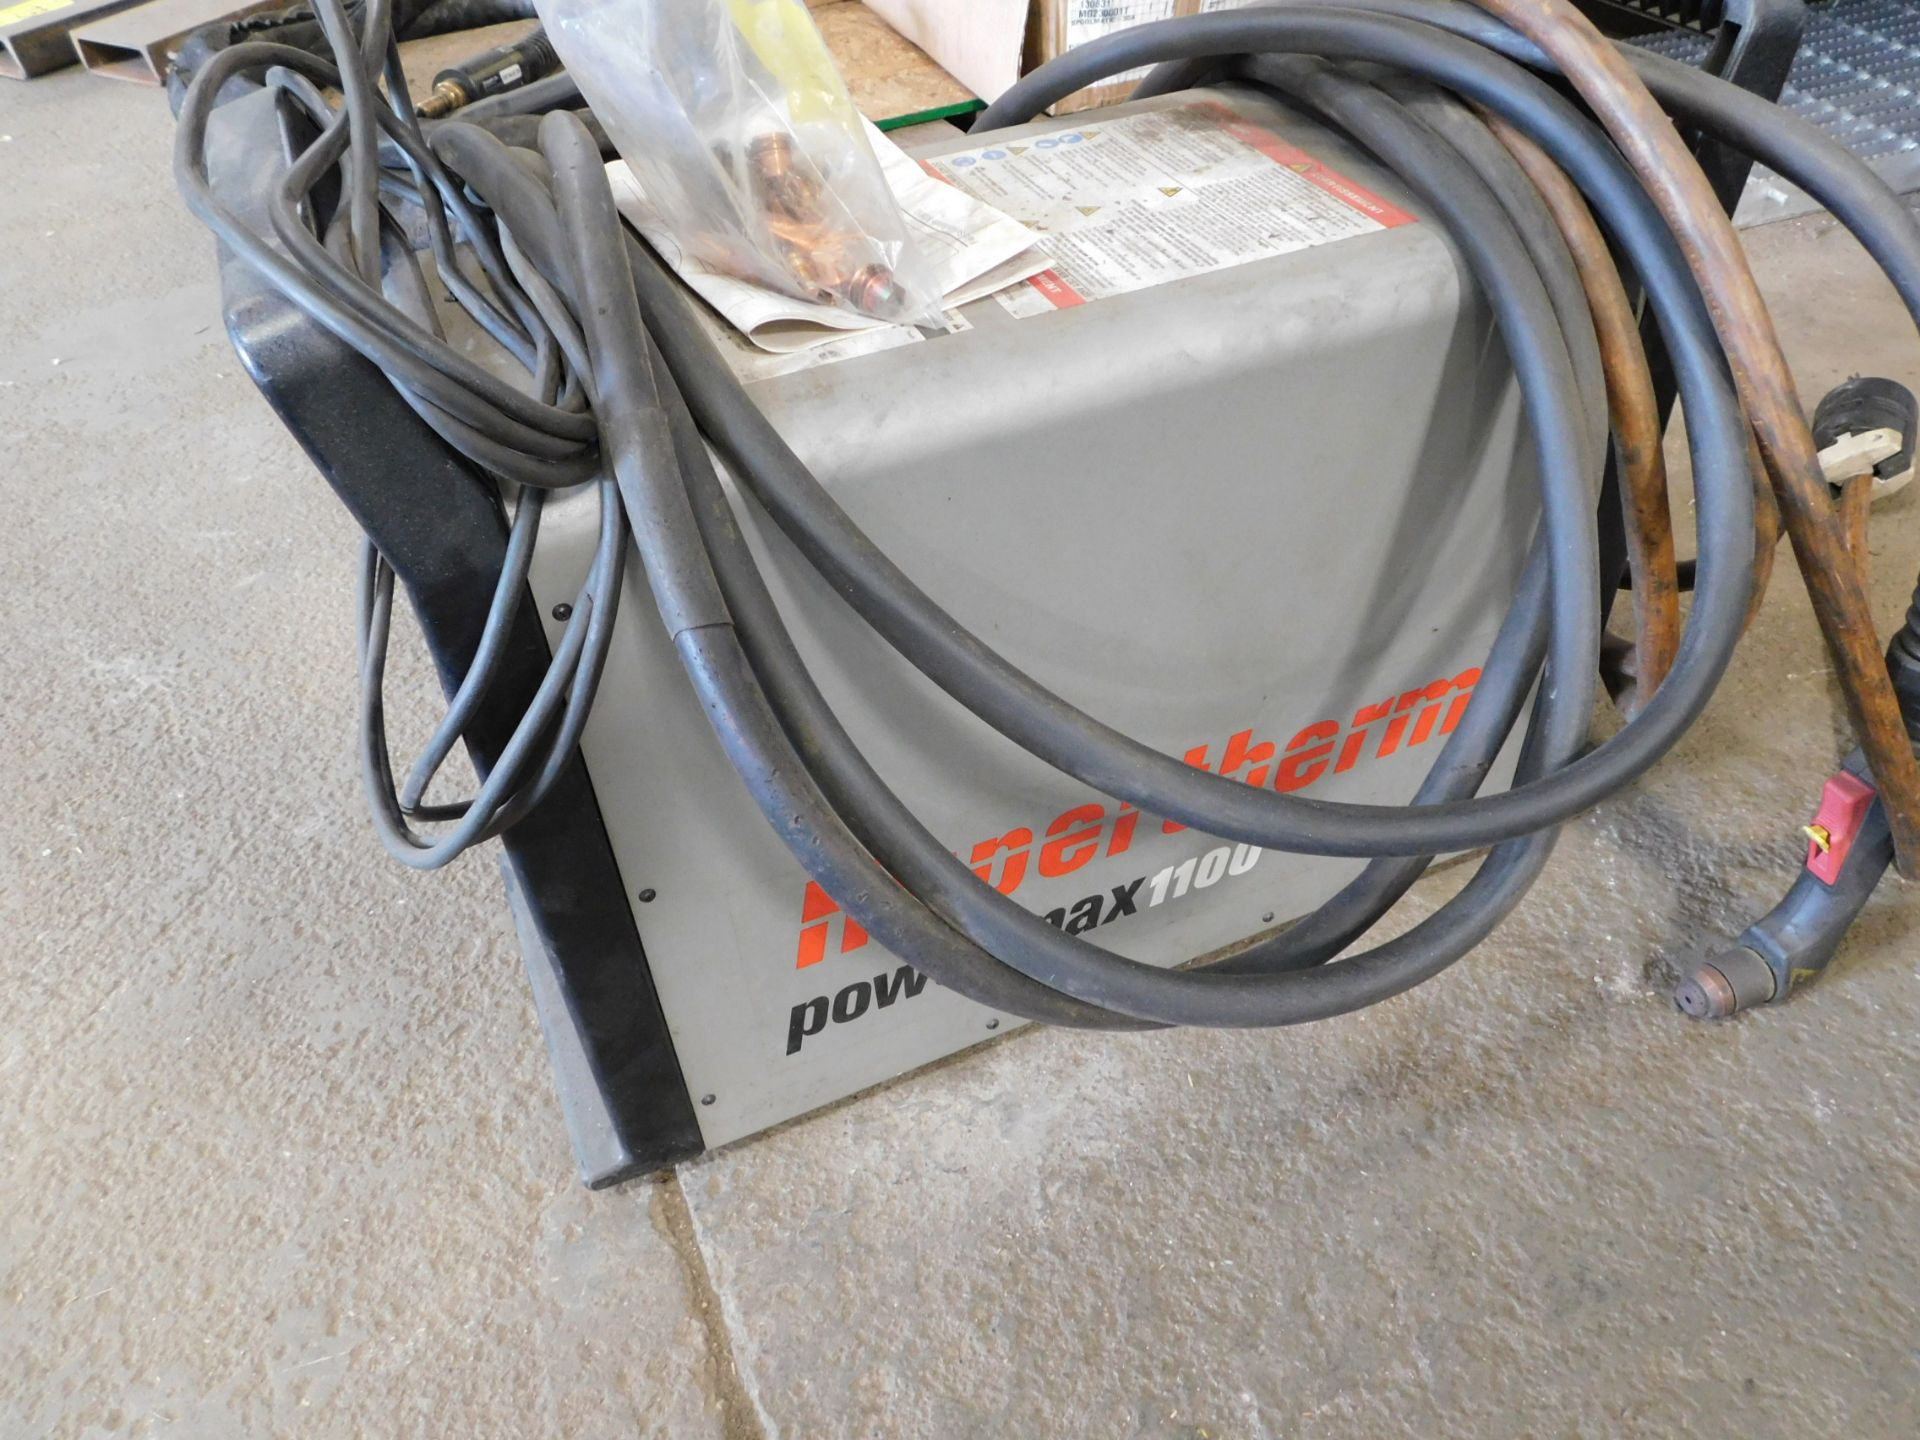 Hypertherm Powermax 1100 Plasma Cutter, SN 1100-016386, 208/240/480V, 1 Phase or 3 Phase - Image 3 of 6